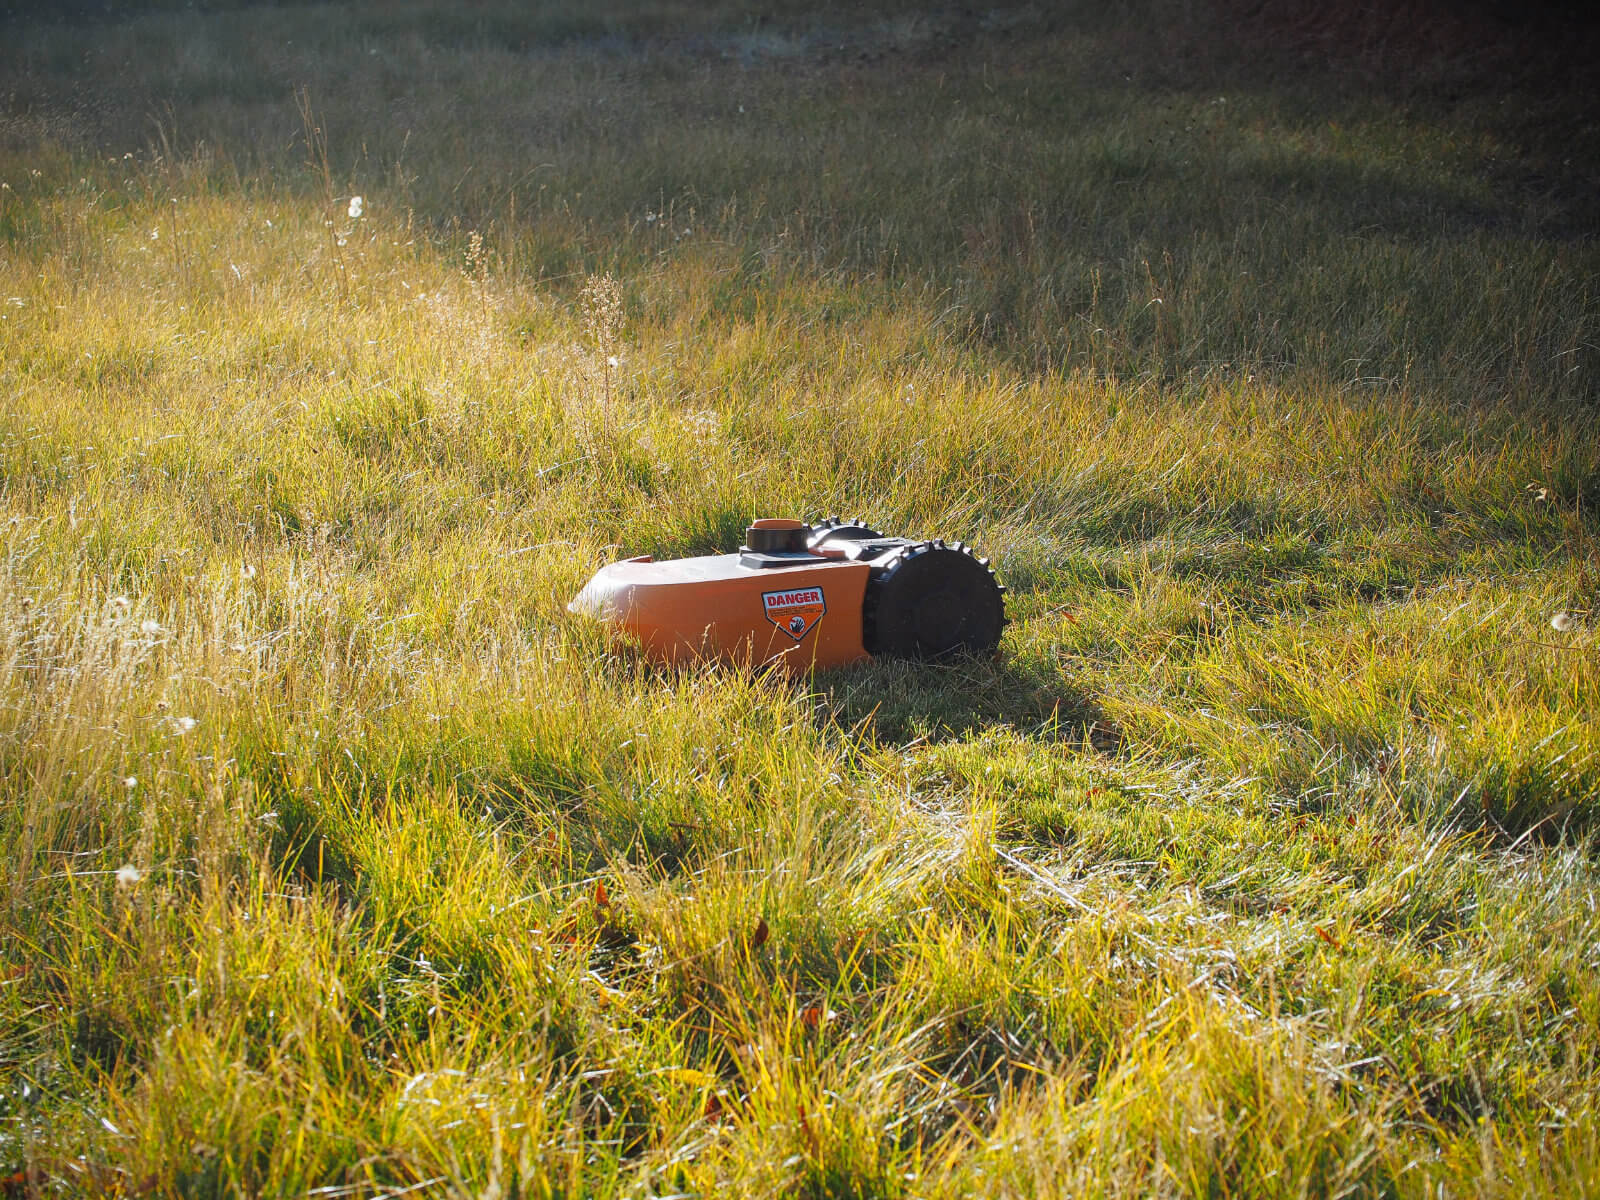 Fully automated, battery-powered, self-propelled robotic lawnmower